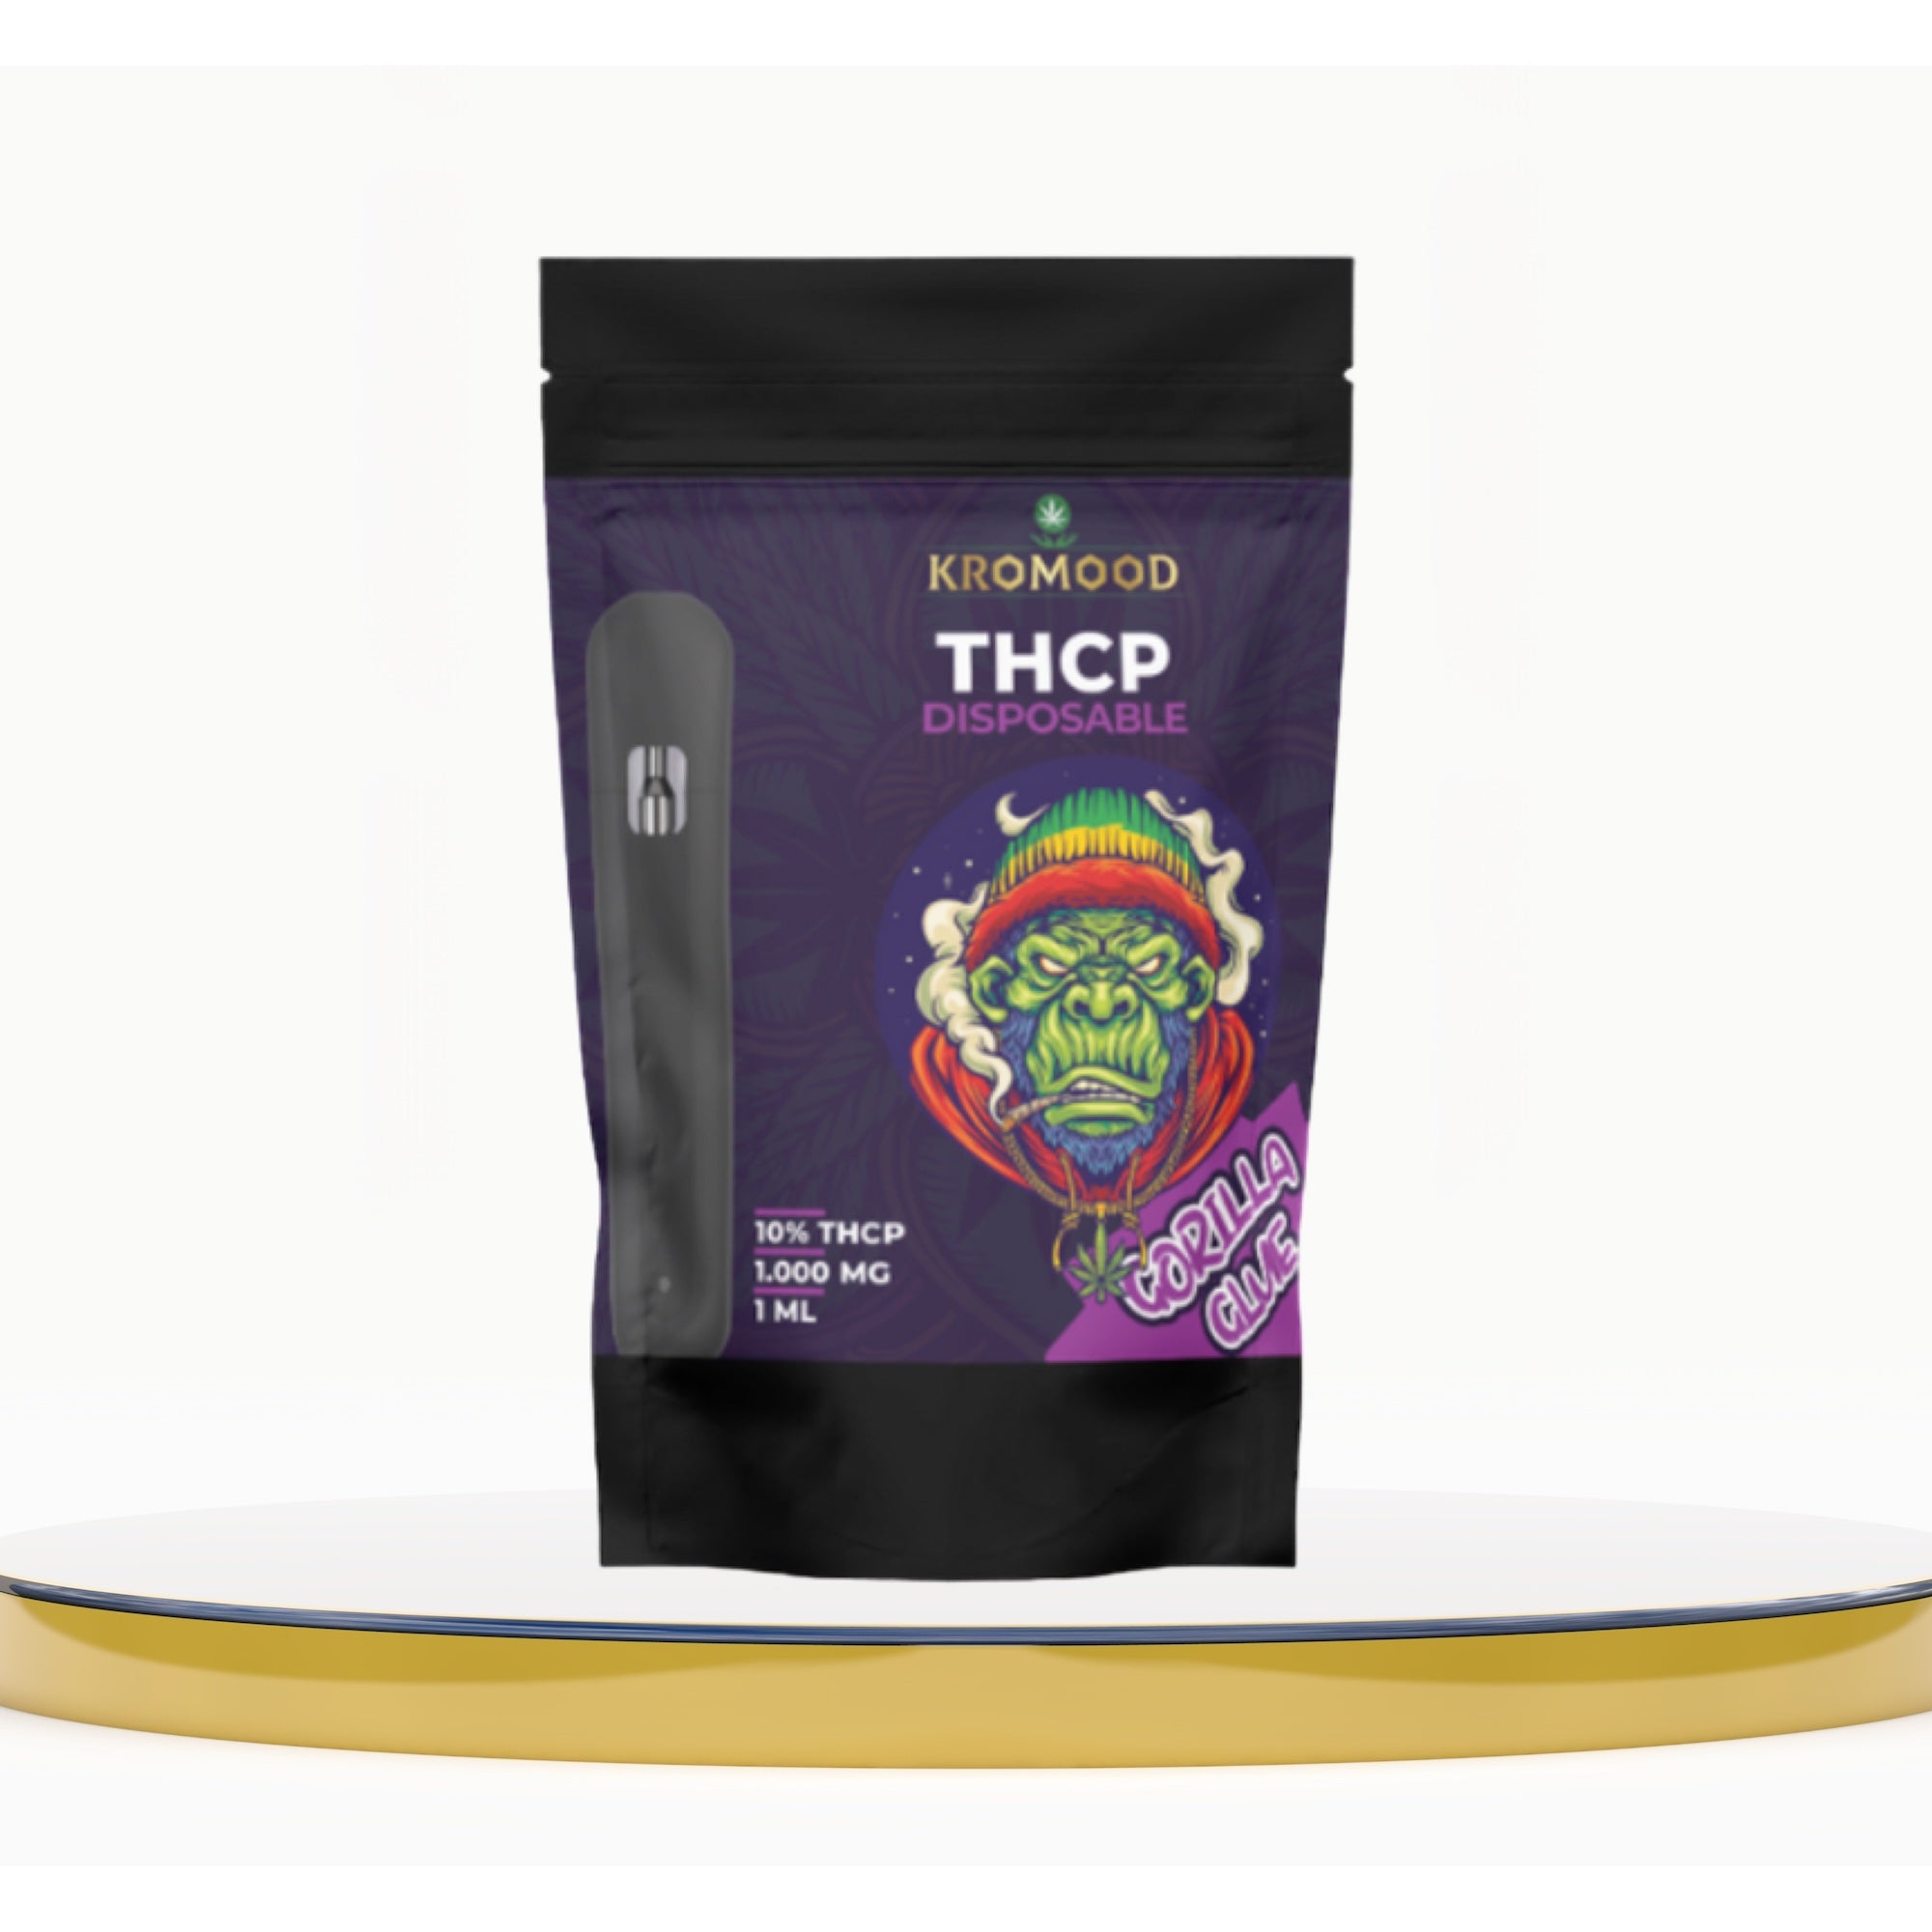 KroMood THCP Disposable Puff - Gorilla Glue: The Peak of Vaping, 10% THCP/1ML, 600 Puffs, CCELL Puff Technology 